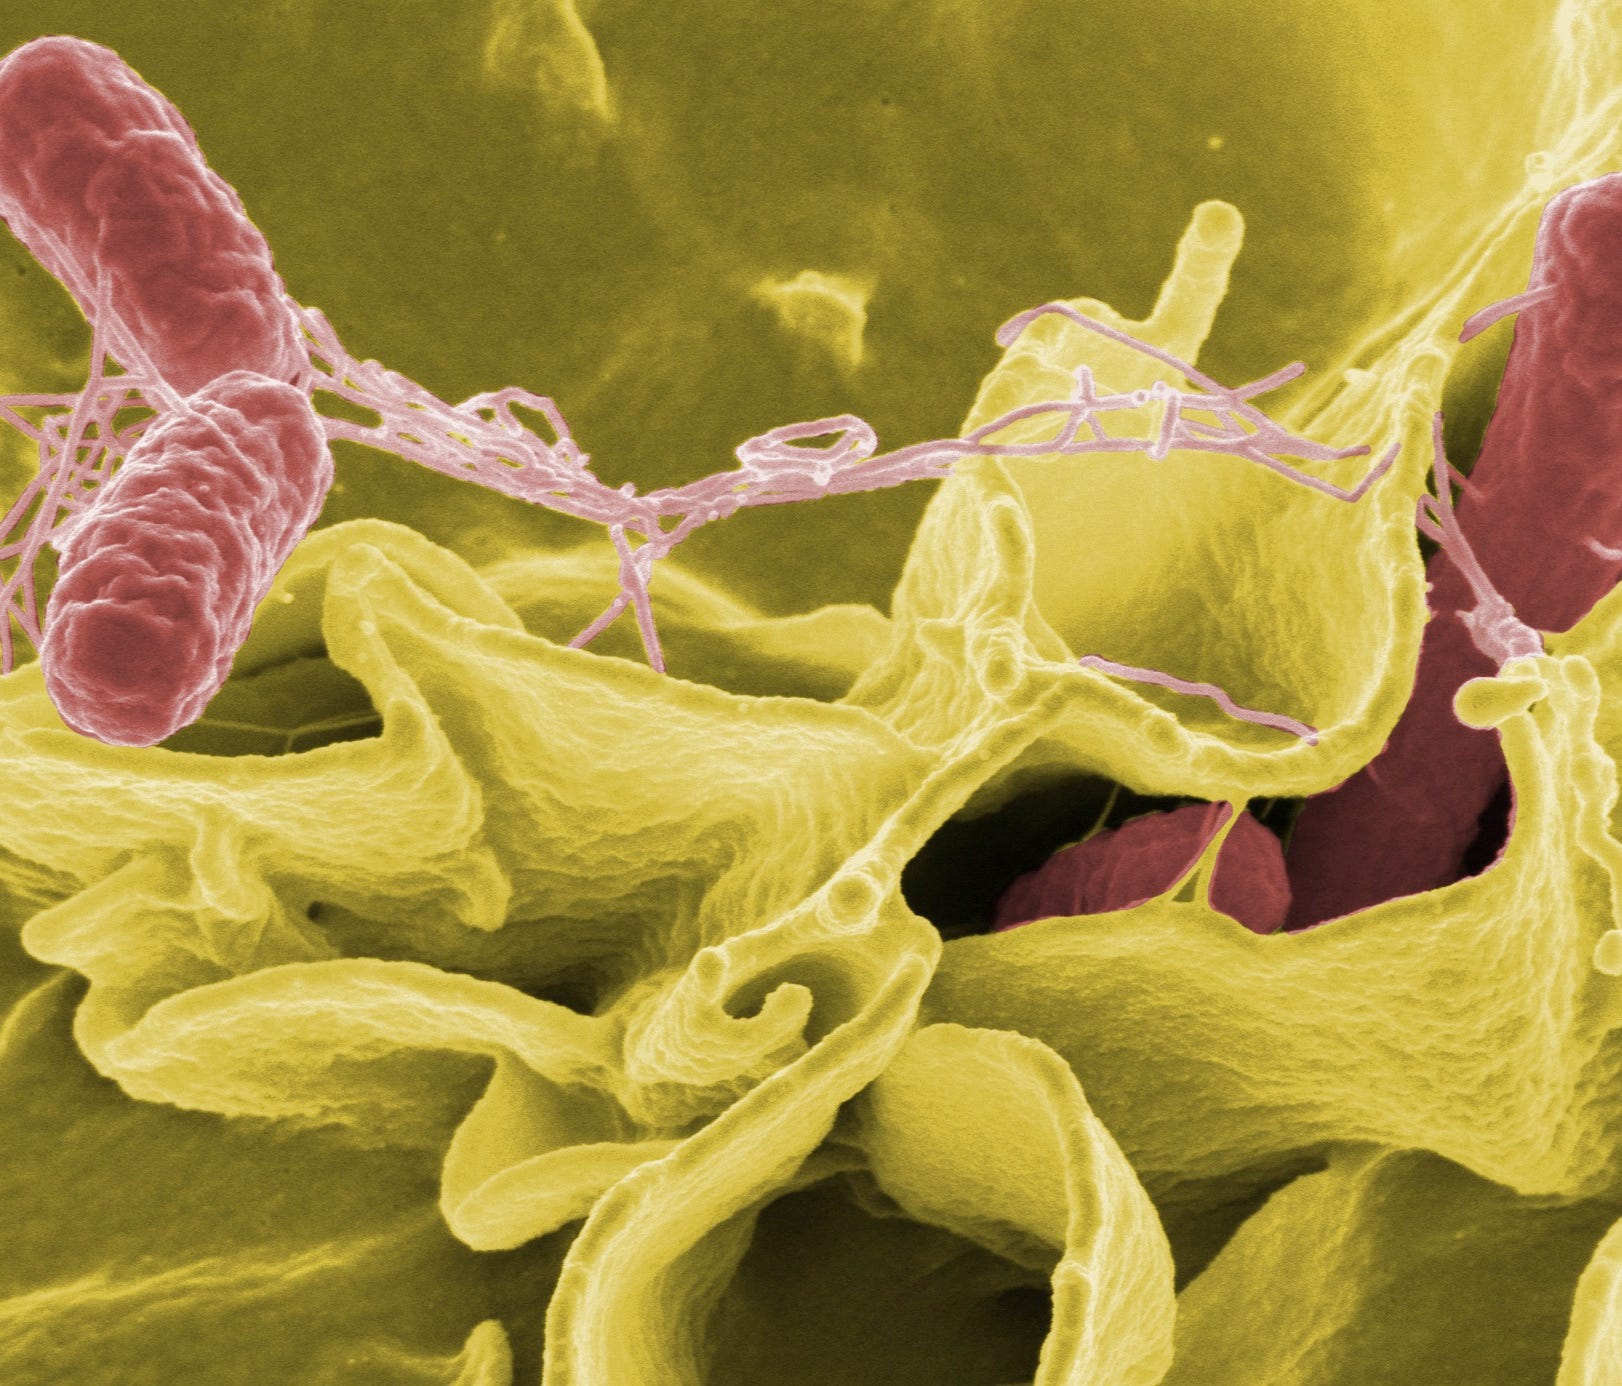 Salmonella, among other pathogens, can thrive on these common kitchen items.